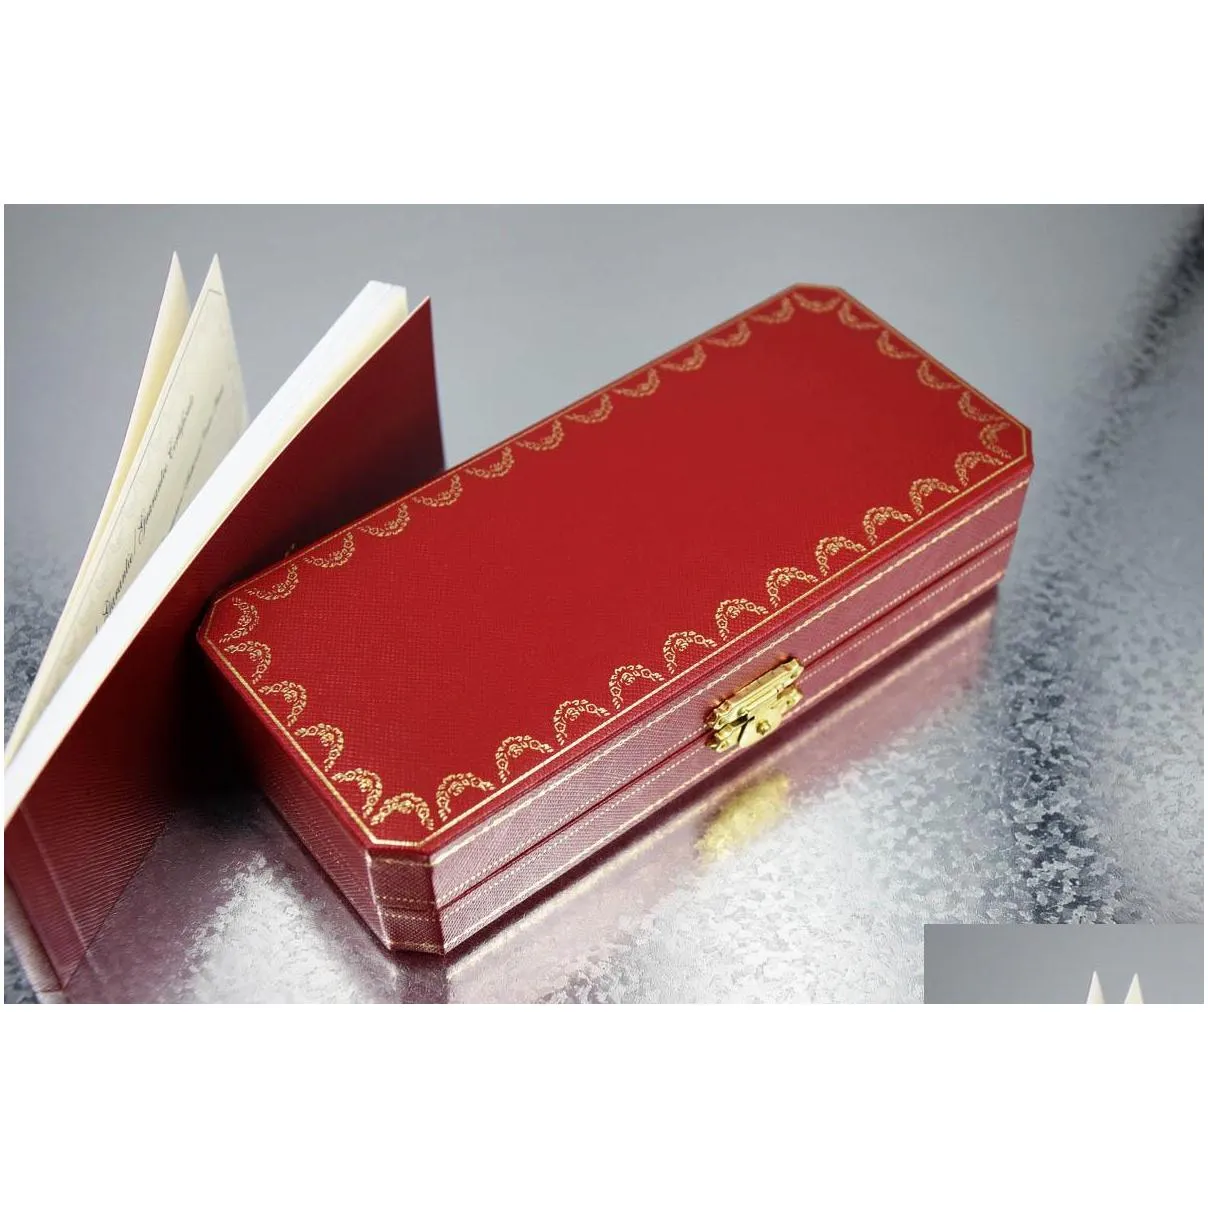 2 styles high quality office school stationery top grade red and golden trim lockable luxury gift pen box with the warranty manual